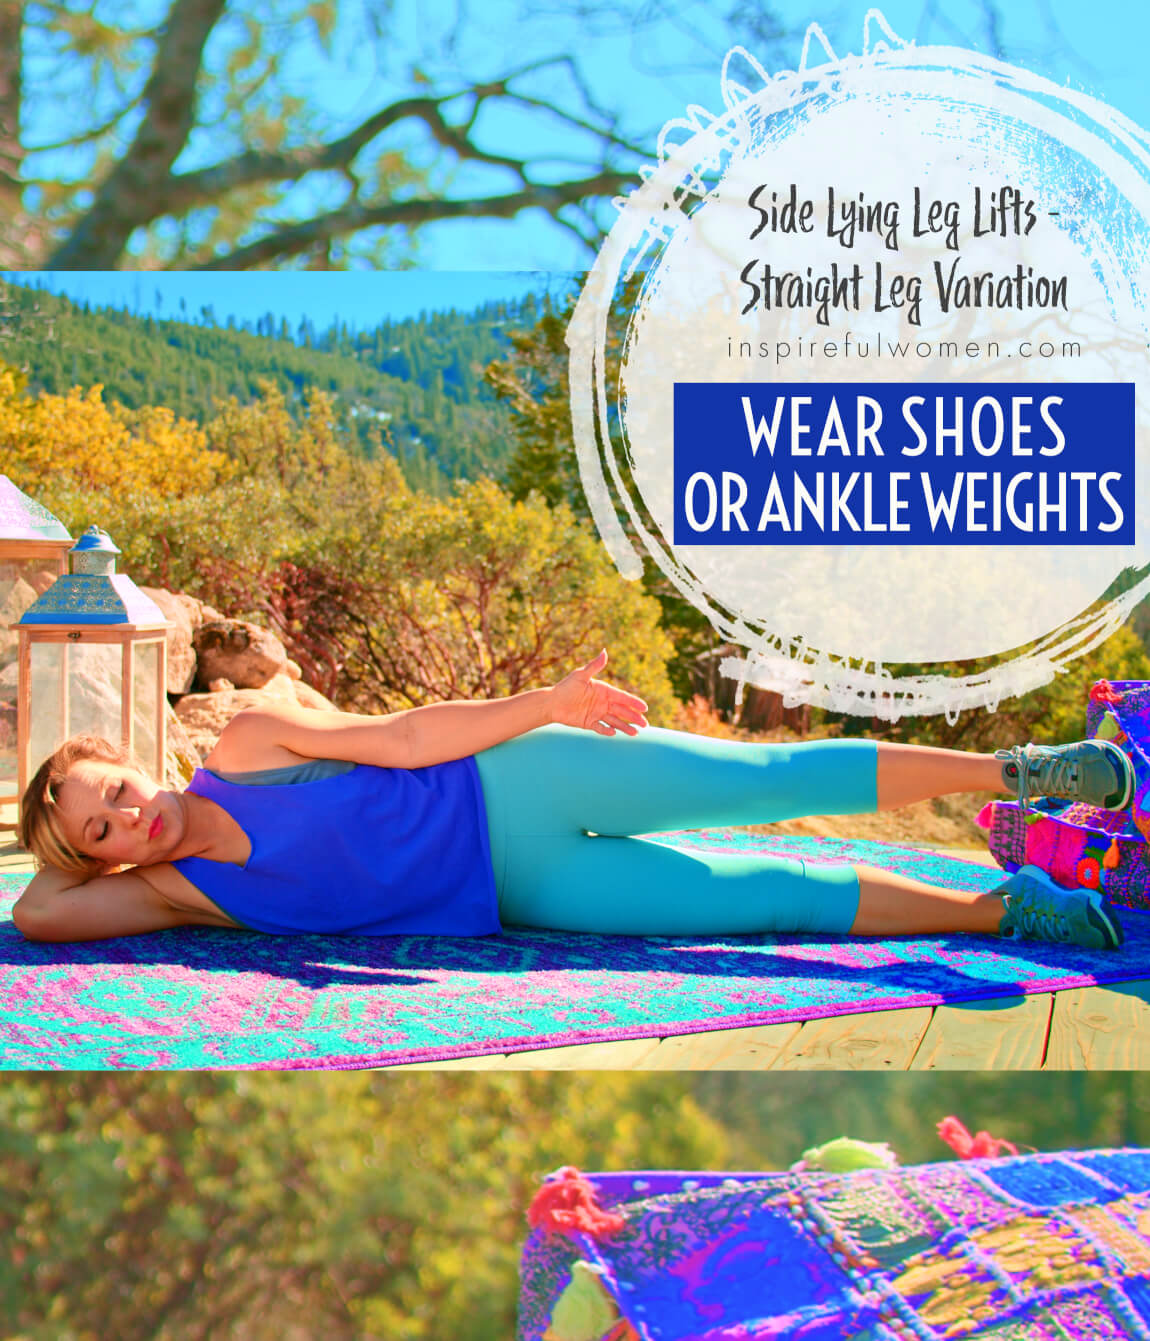 wear-shoes-ankle-weights-side-lying-straight-leg-raise-variation